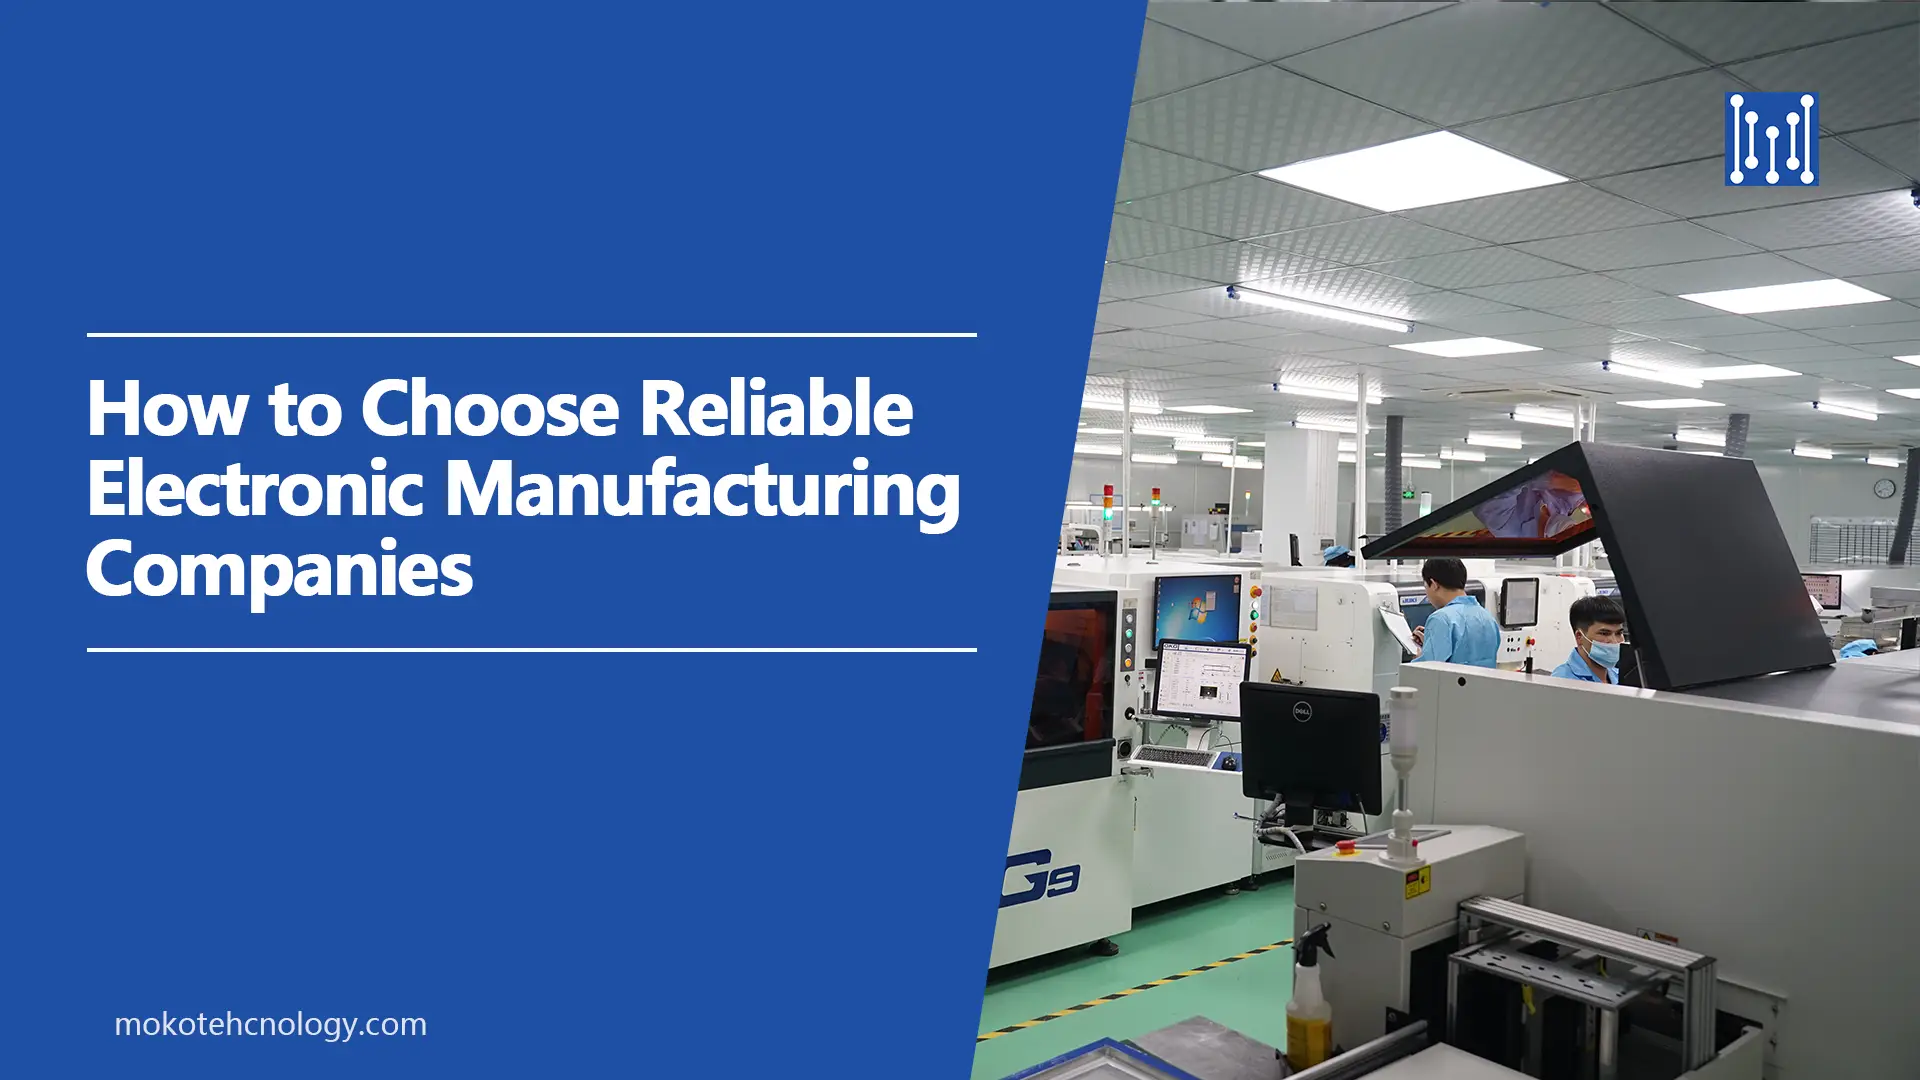 How to Choose Reliable Electronic Manufacturing Companies